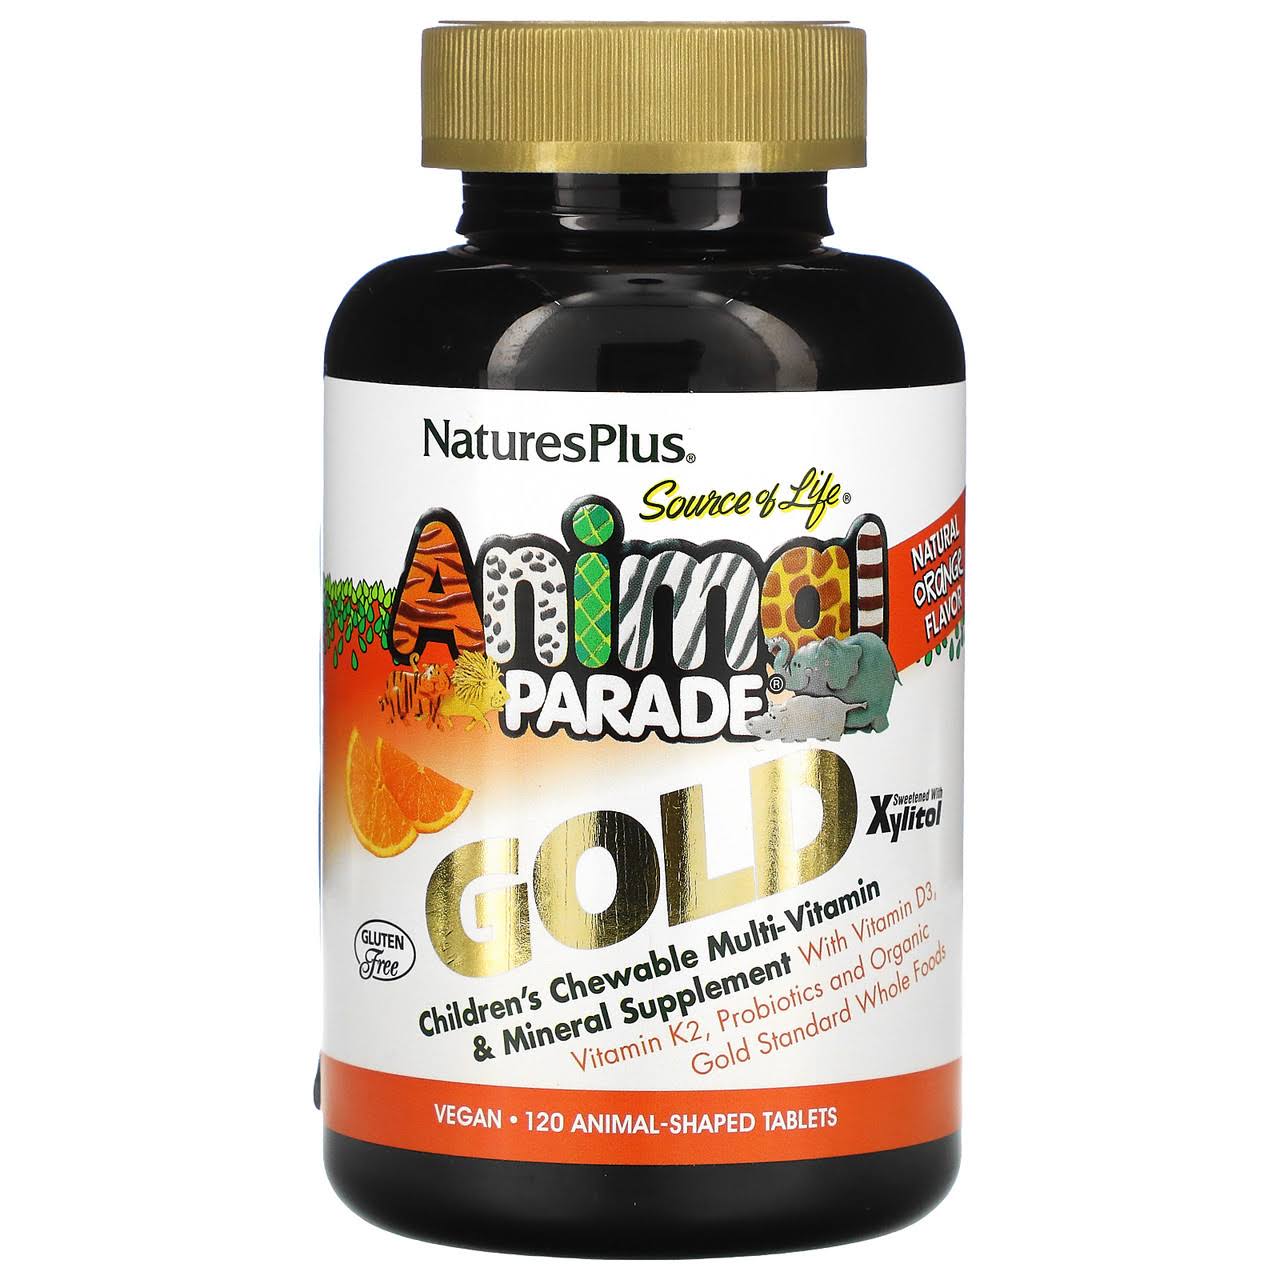 Nature's Plus, Source of Life, Animal Parade Gold, Children's Chewable Multi-Vitamin & Mineral Supplement, Natural Orange, 120 Animal-shaped Tablets